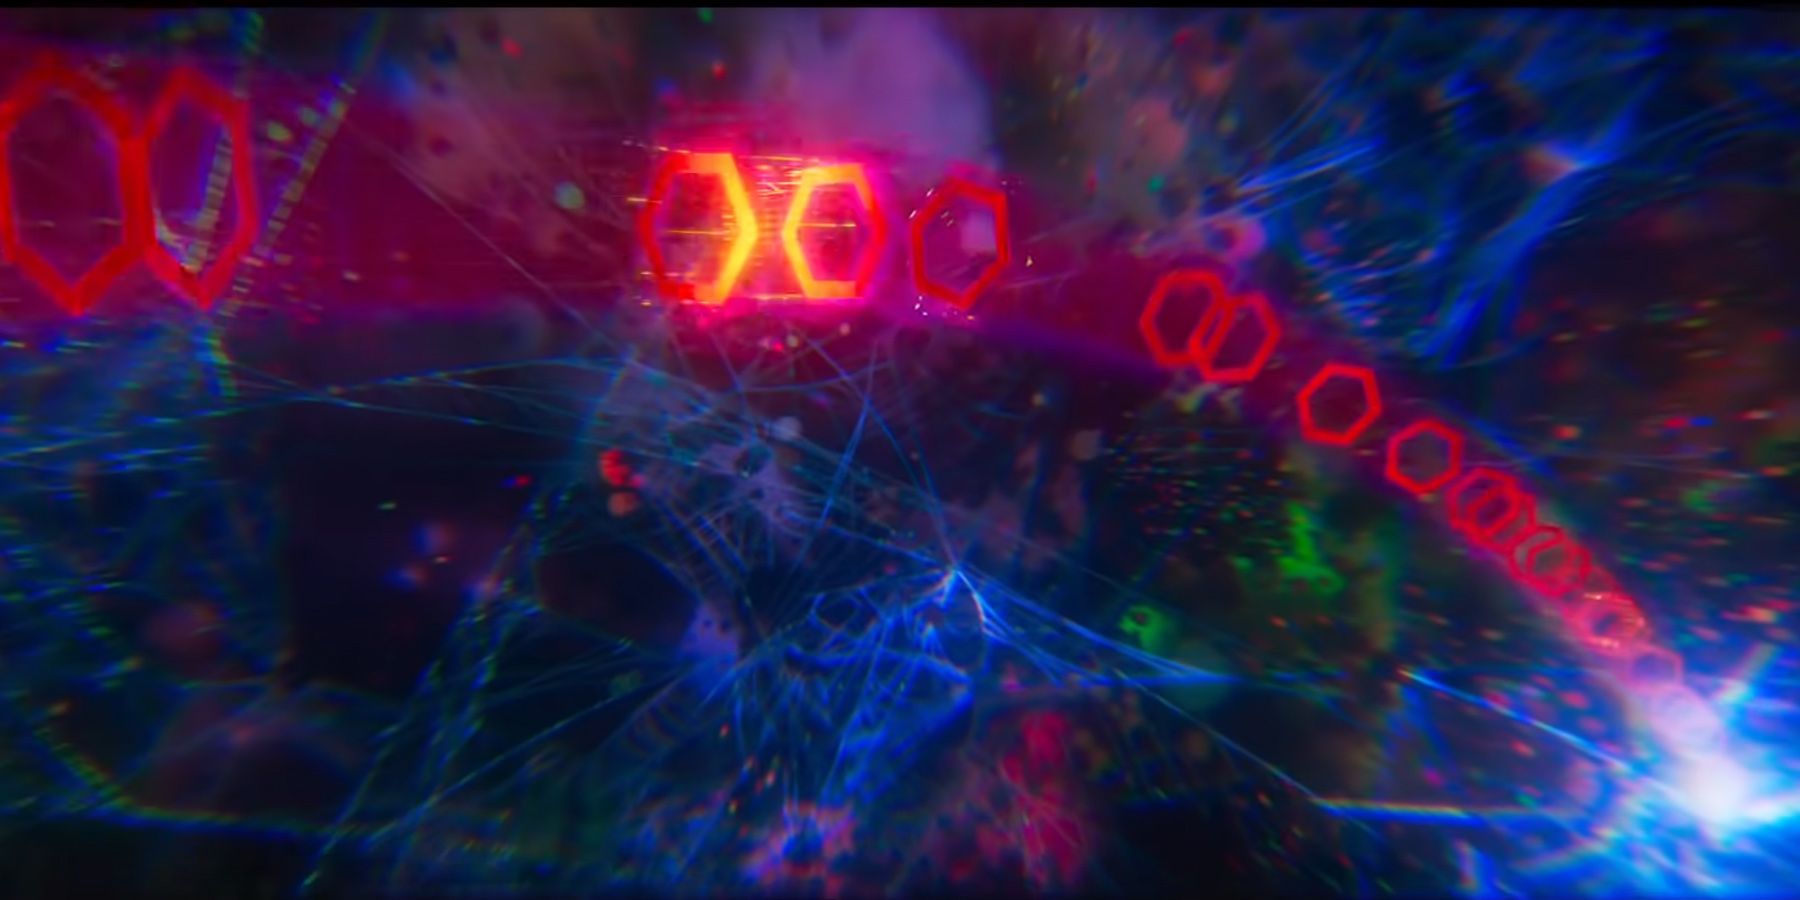 The Multiverse in Across The Spider-Verse seems like the Web of Life and Destiny